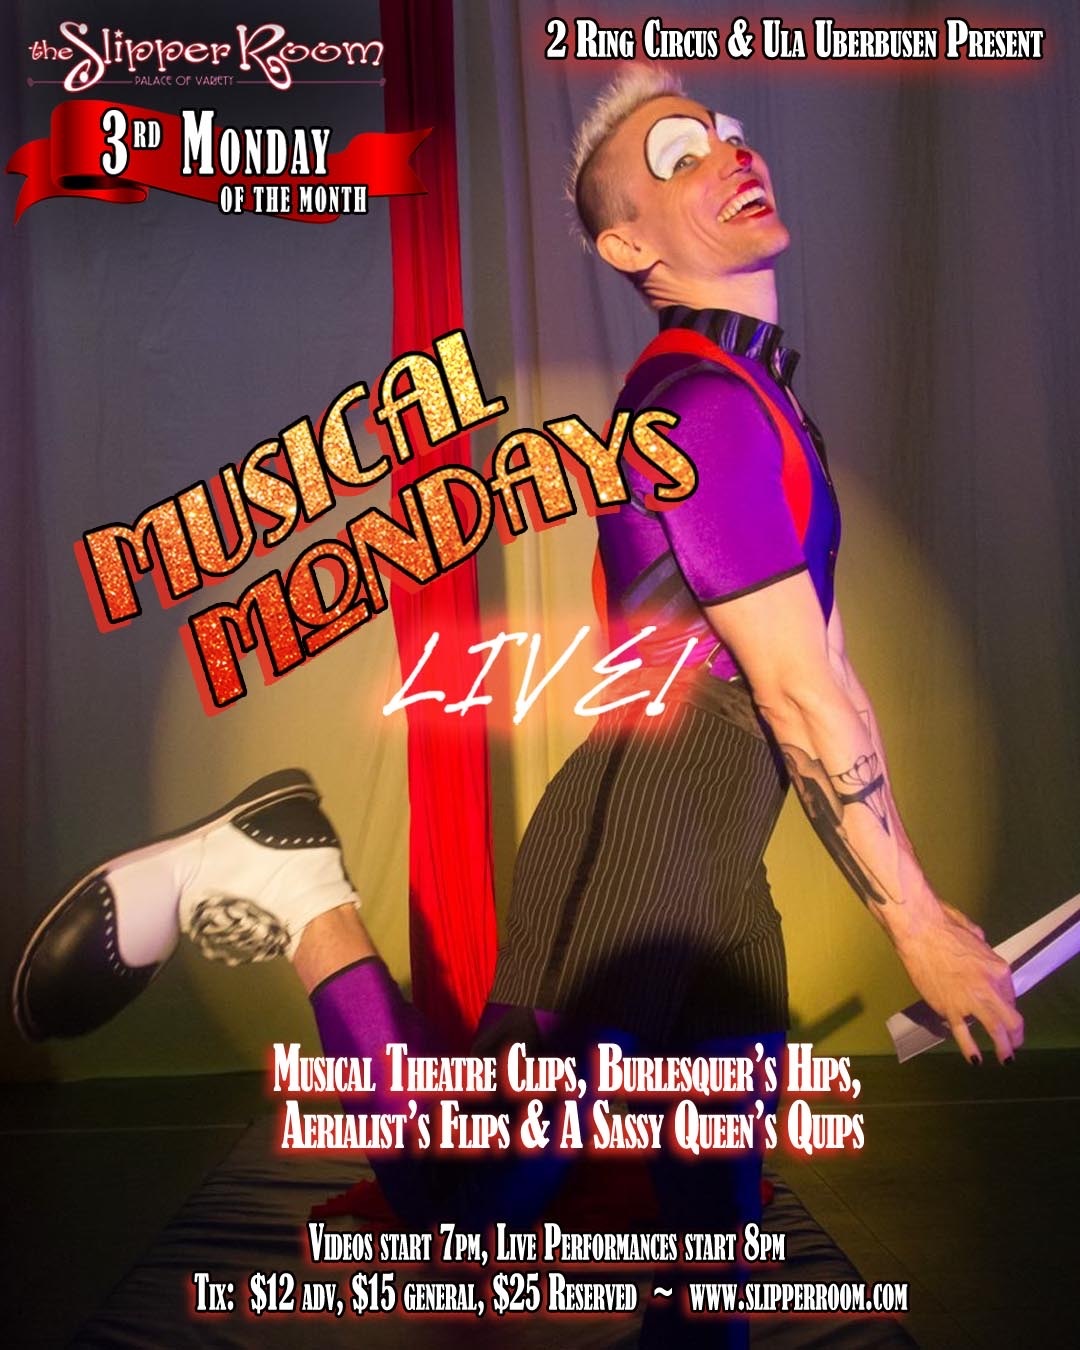 Co-creator of Musical Mondays: Live!, Joshua Dean is an award-winning aerialist & burlesquer. ??? Come see him on February 18th at the Slipper Room - and you just might get a glimpse of his alter-ego #JojoTheClown! ??????? Videos at 7pm, Live Show at 8pm. ? Slipperroom(dot)com ??? #musicalmondayslive is presented by @ulauberbusen & @2ringcircus and continues on the 3rd Monday of the month at the @slipperroomnyc. The February 18 edition features performances by @eve.starr @iambenfranklin @aerialjosh @ulauberbusen @mr.jackbarrow & @_theivoryfox_ ??? #musicalmondays #live #burlesque #boylesque #nycburlesque #cabaret #dragqueen #nycdrag #nycnightlife #burlesqueshow #singalong #broadway #musicaltheatre #showtunes #2ringcircus #nyc #circus #aerial #thingstodonyc #mondaynight #slipperroom #slipperroomnyc #liveentertainment